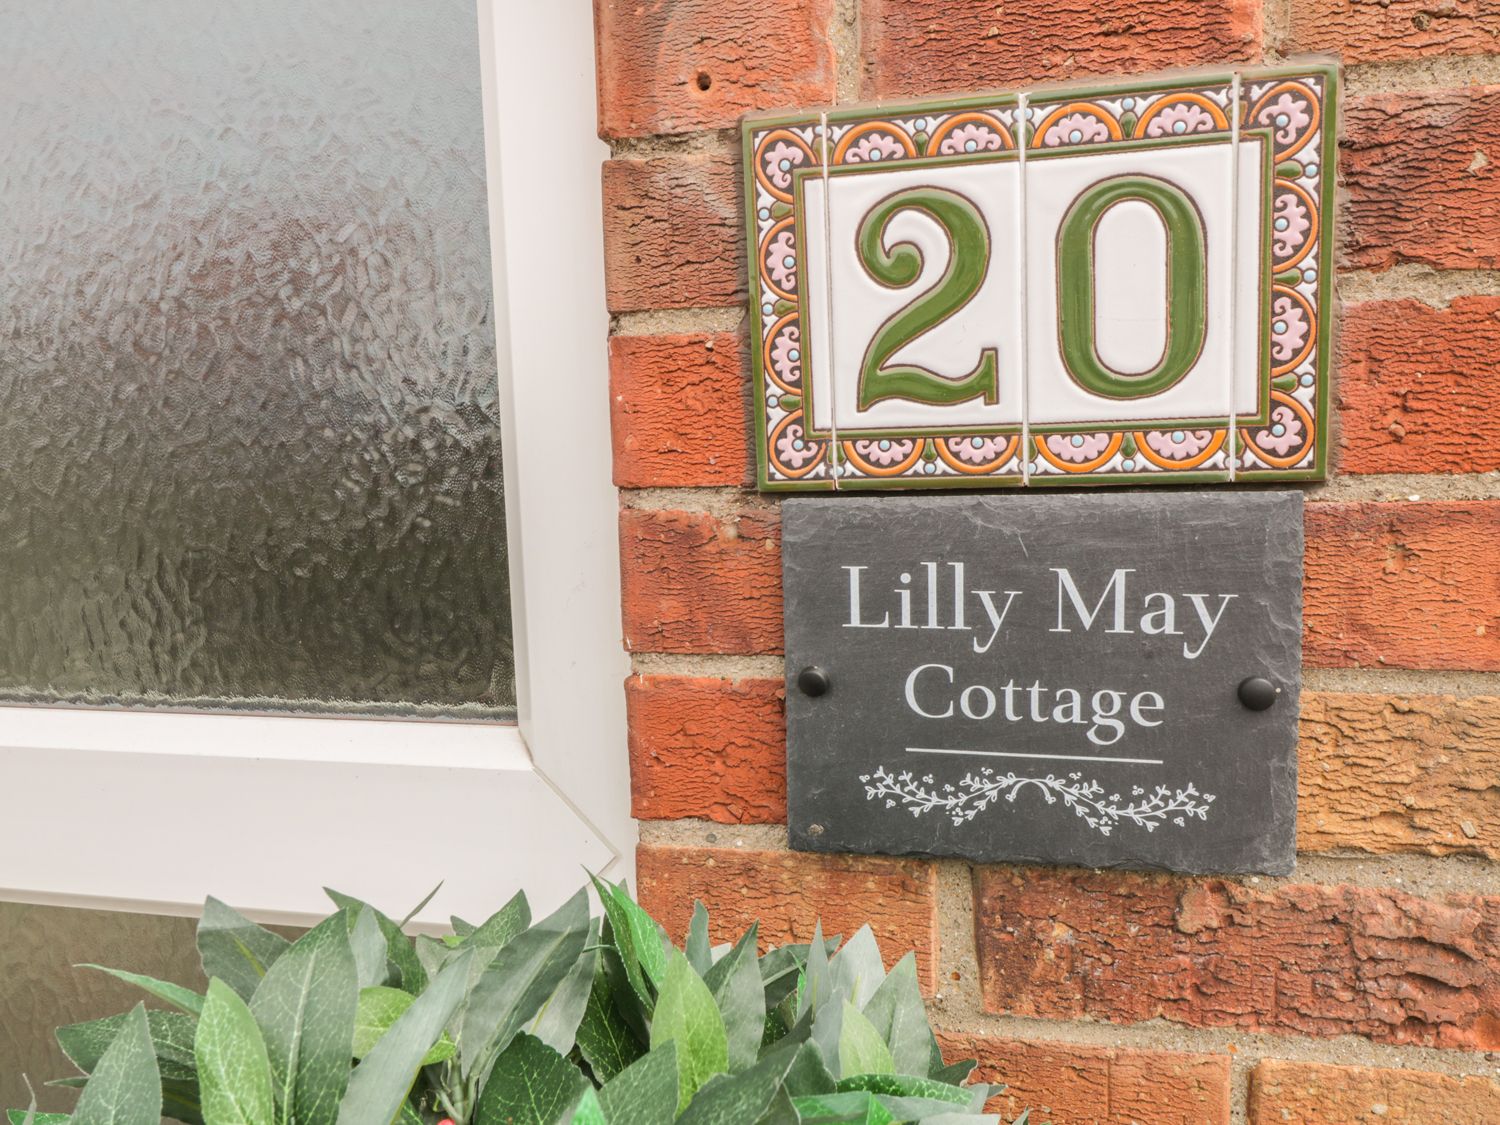 Lilly May Cottage, East Riding of Yorkshire